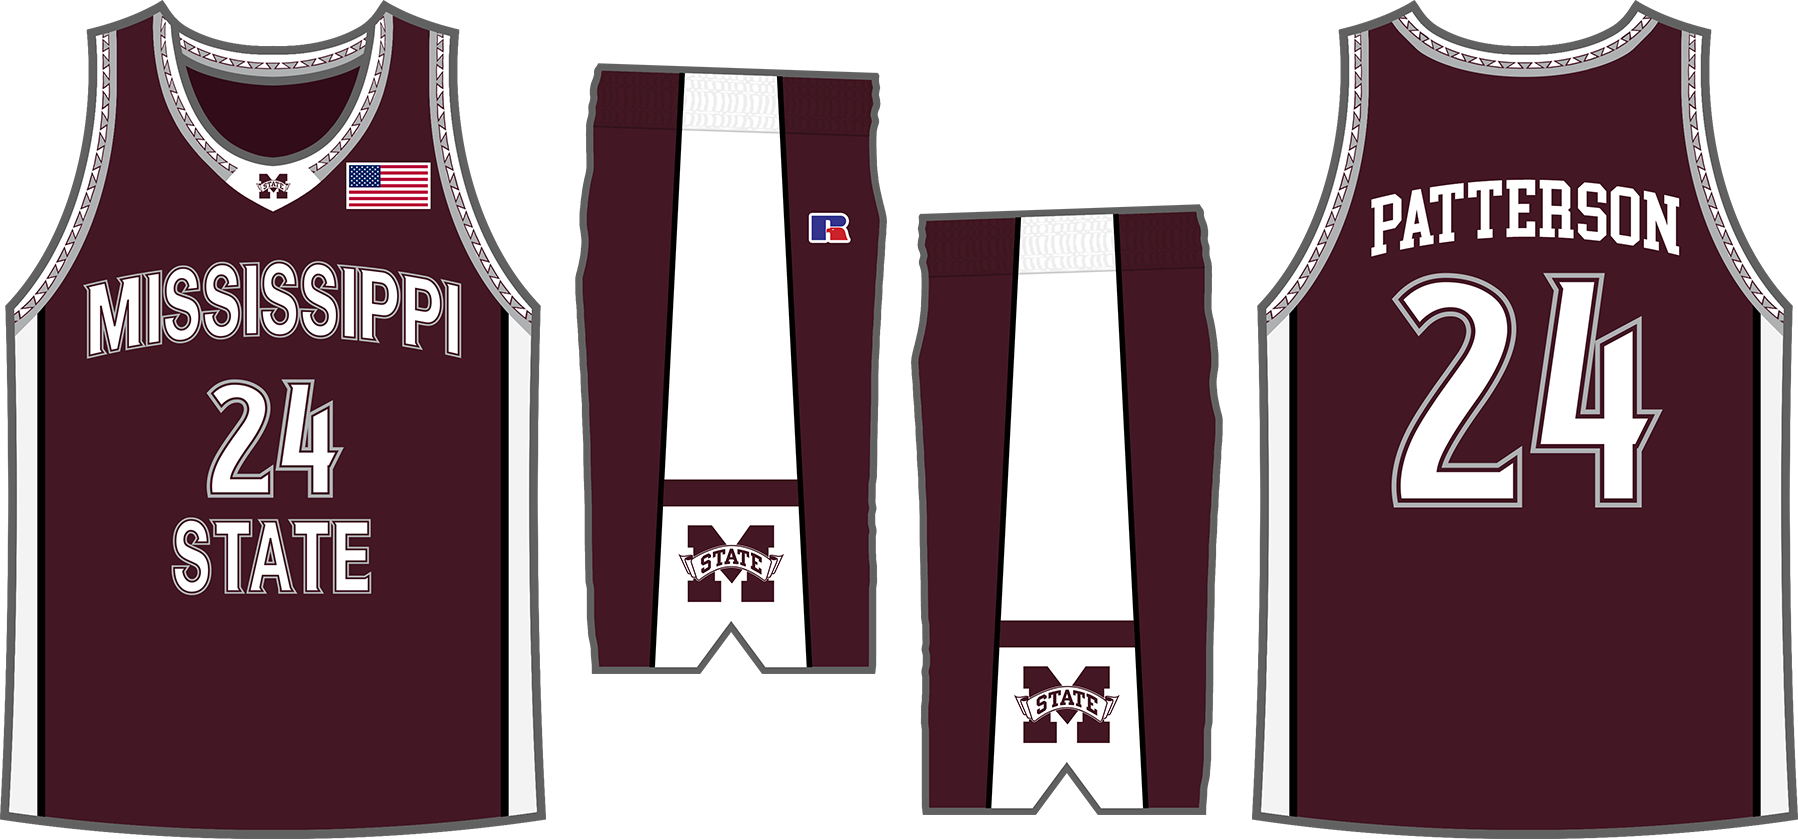 2021 Basketball Uniforms Concept - Hail State Unis